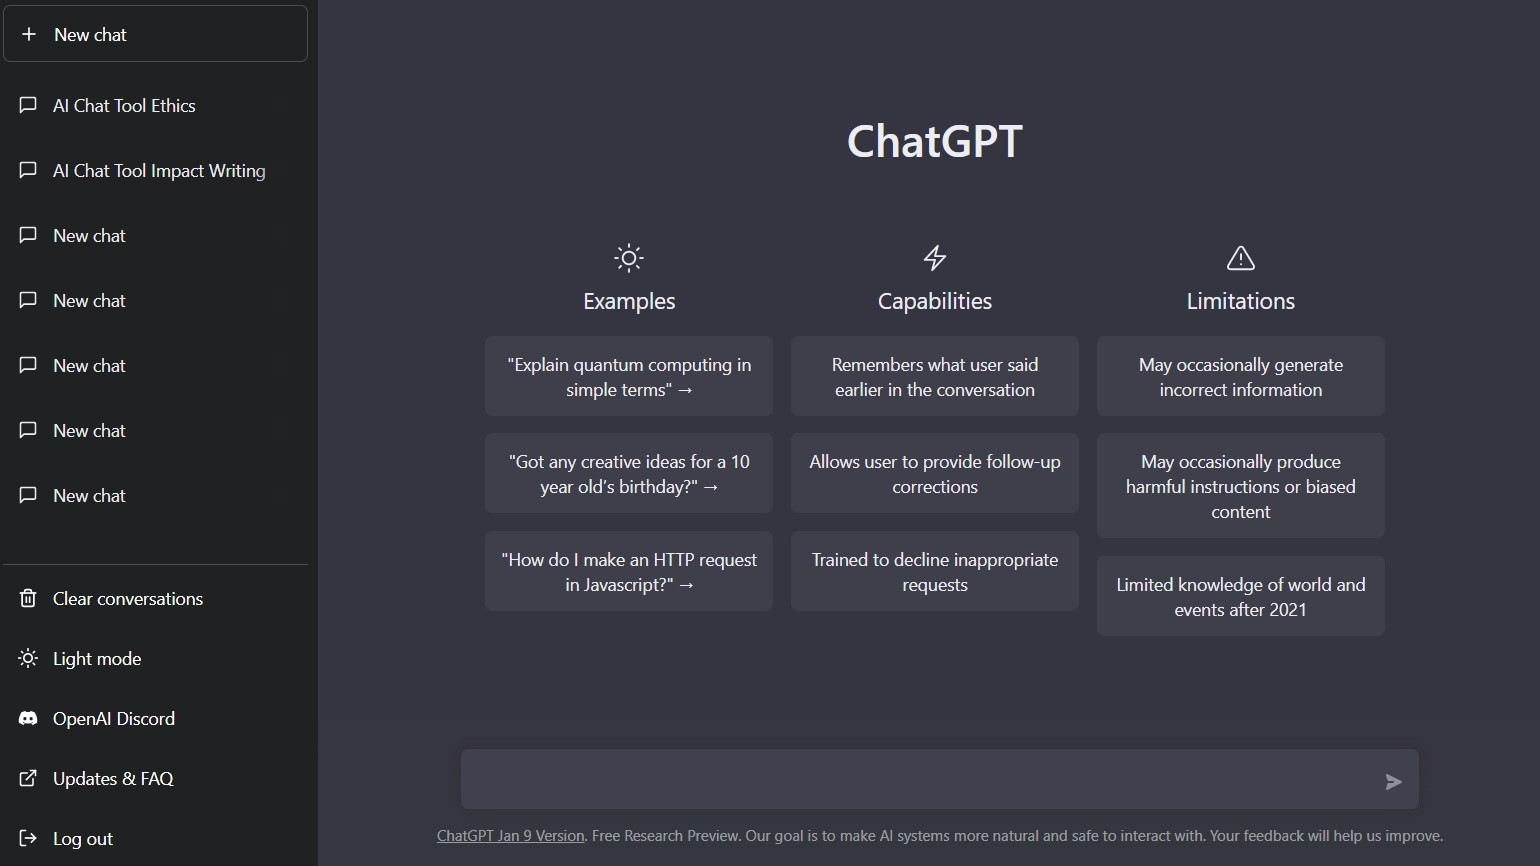 Homepage of ChatGPT showing a list of examples, capabilities, and limitations. 